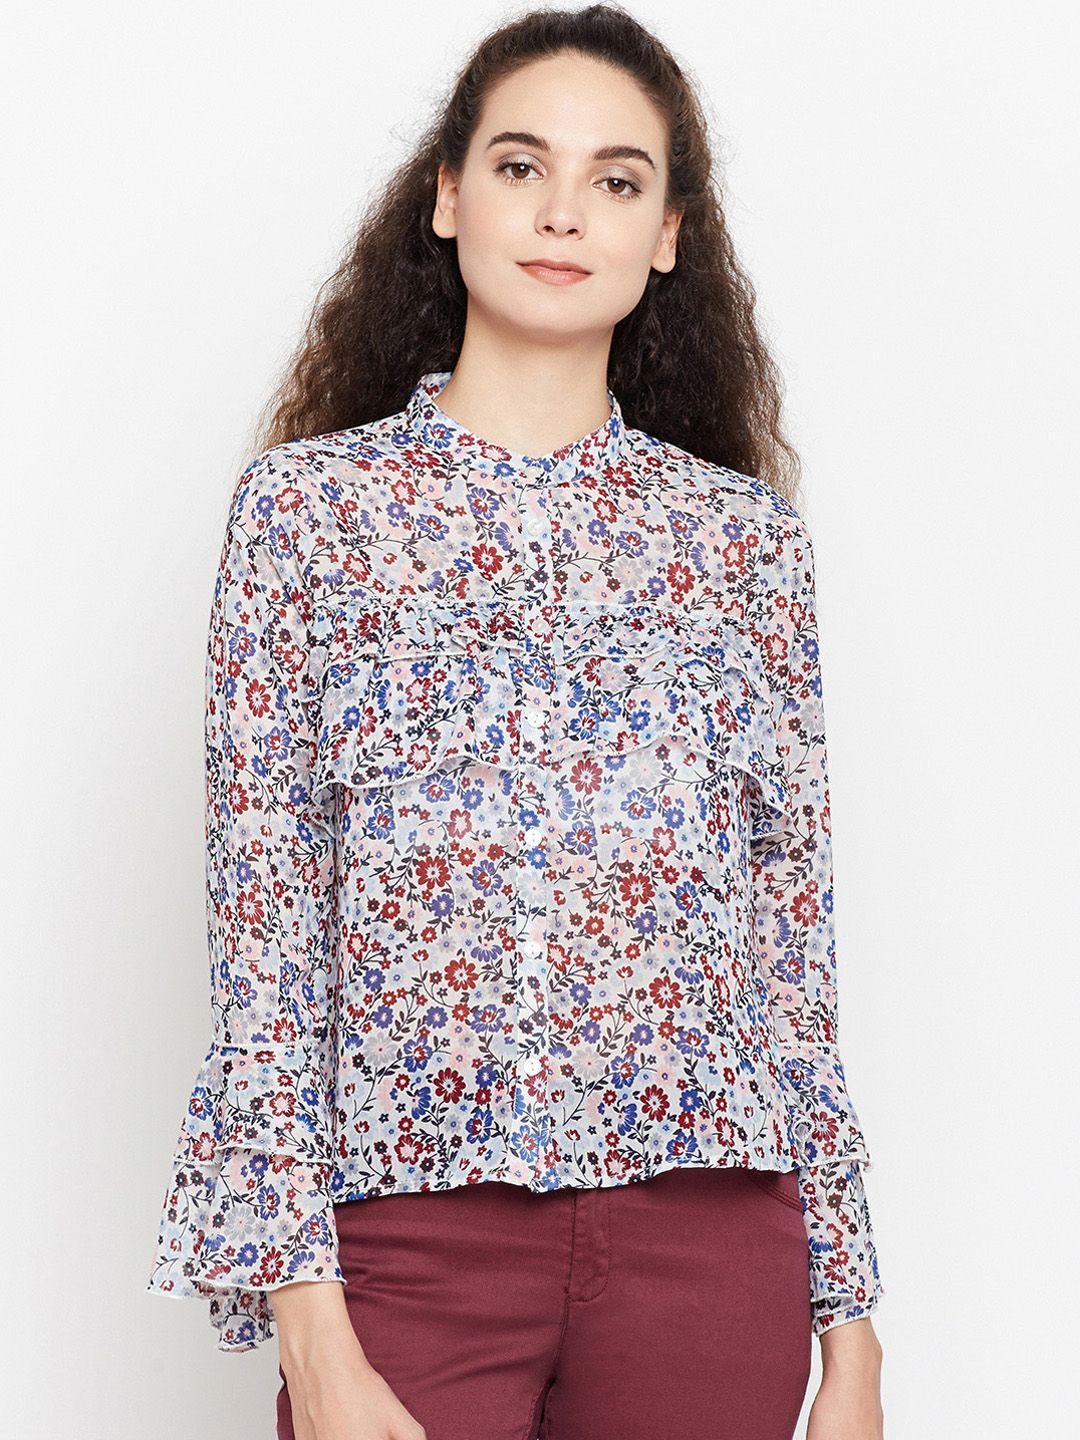 oxolloxo women off-white regular fit floral print casual shirt